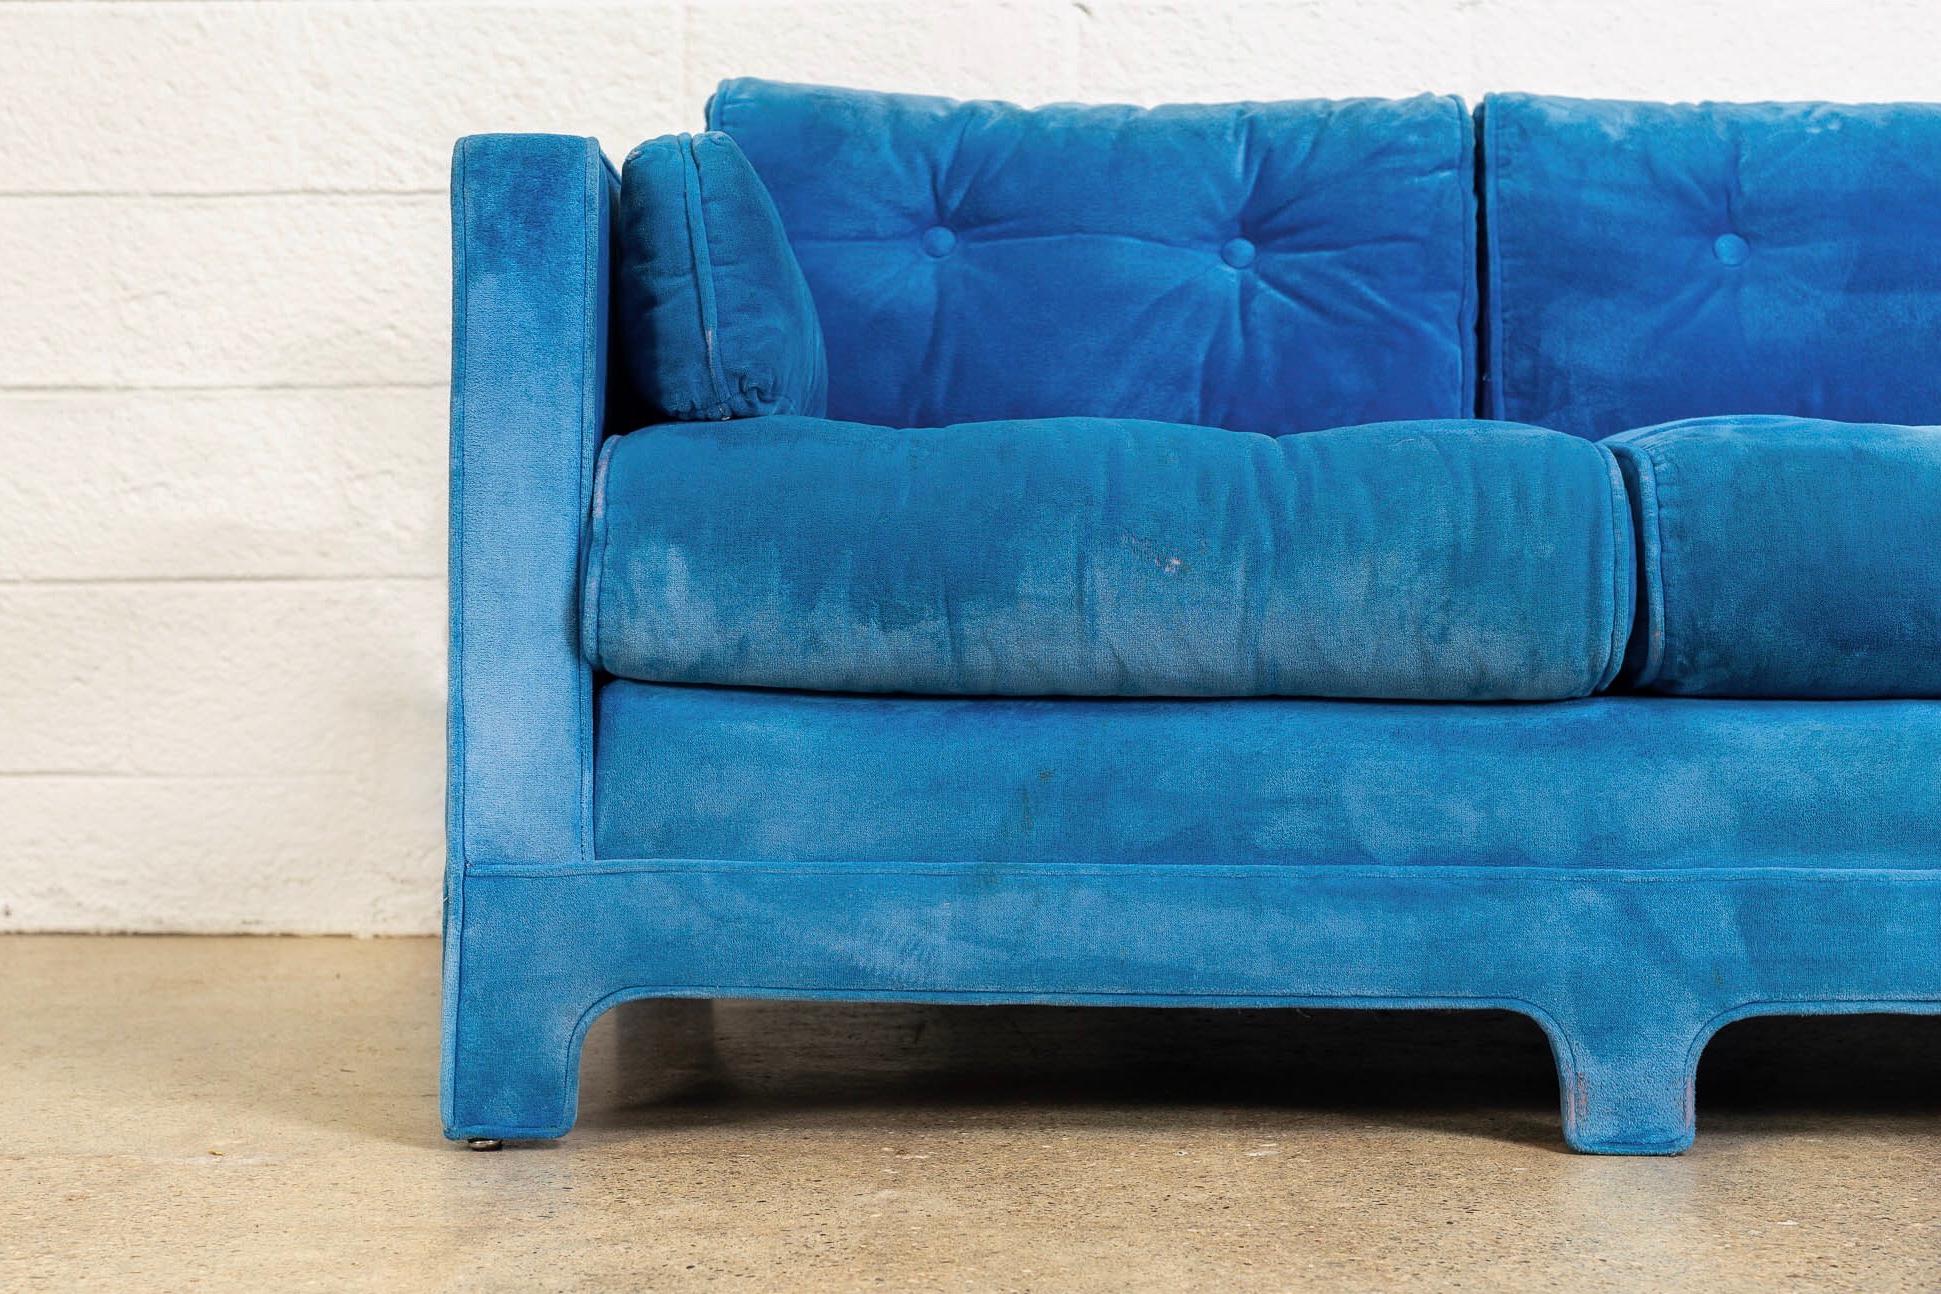 Midcentury Blue Velvet Upholstered Three-Seat Sofa Couch, 1970s For Sale 3